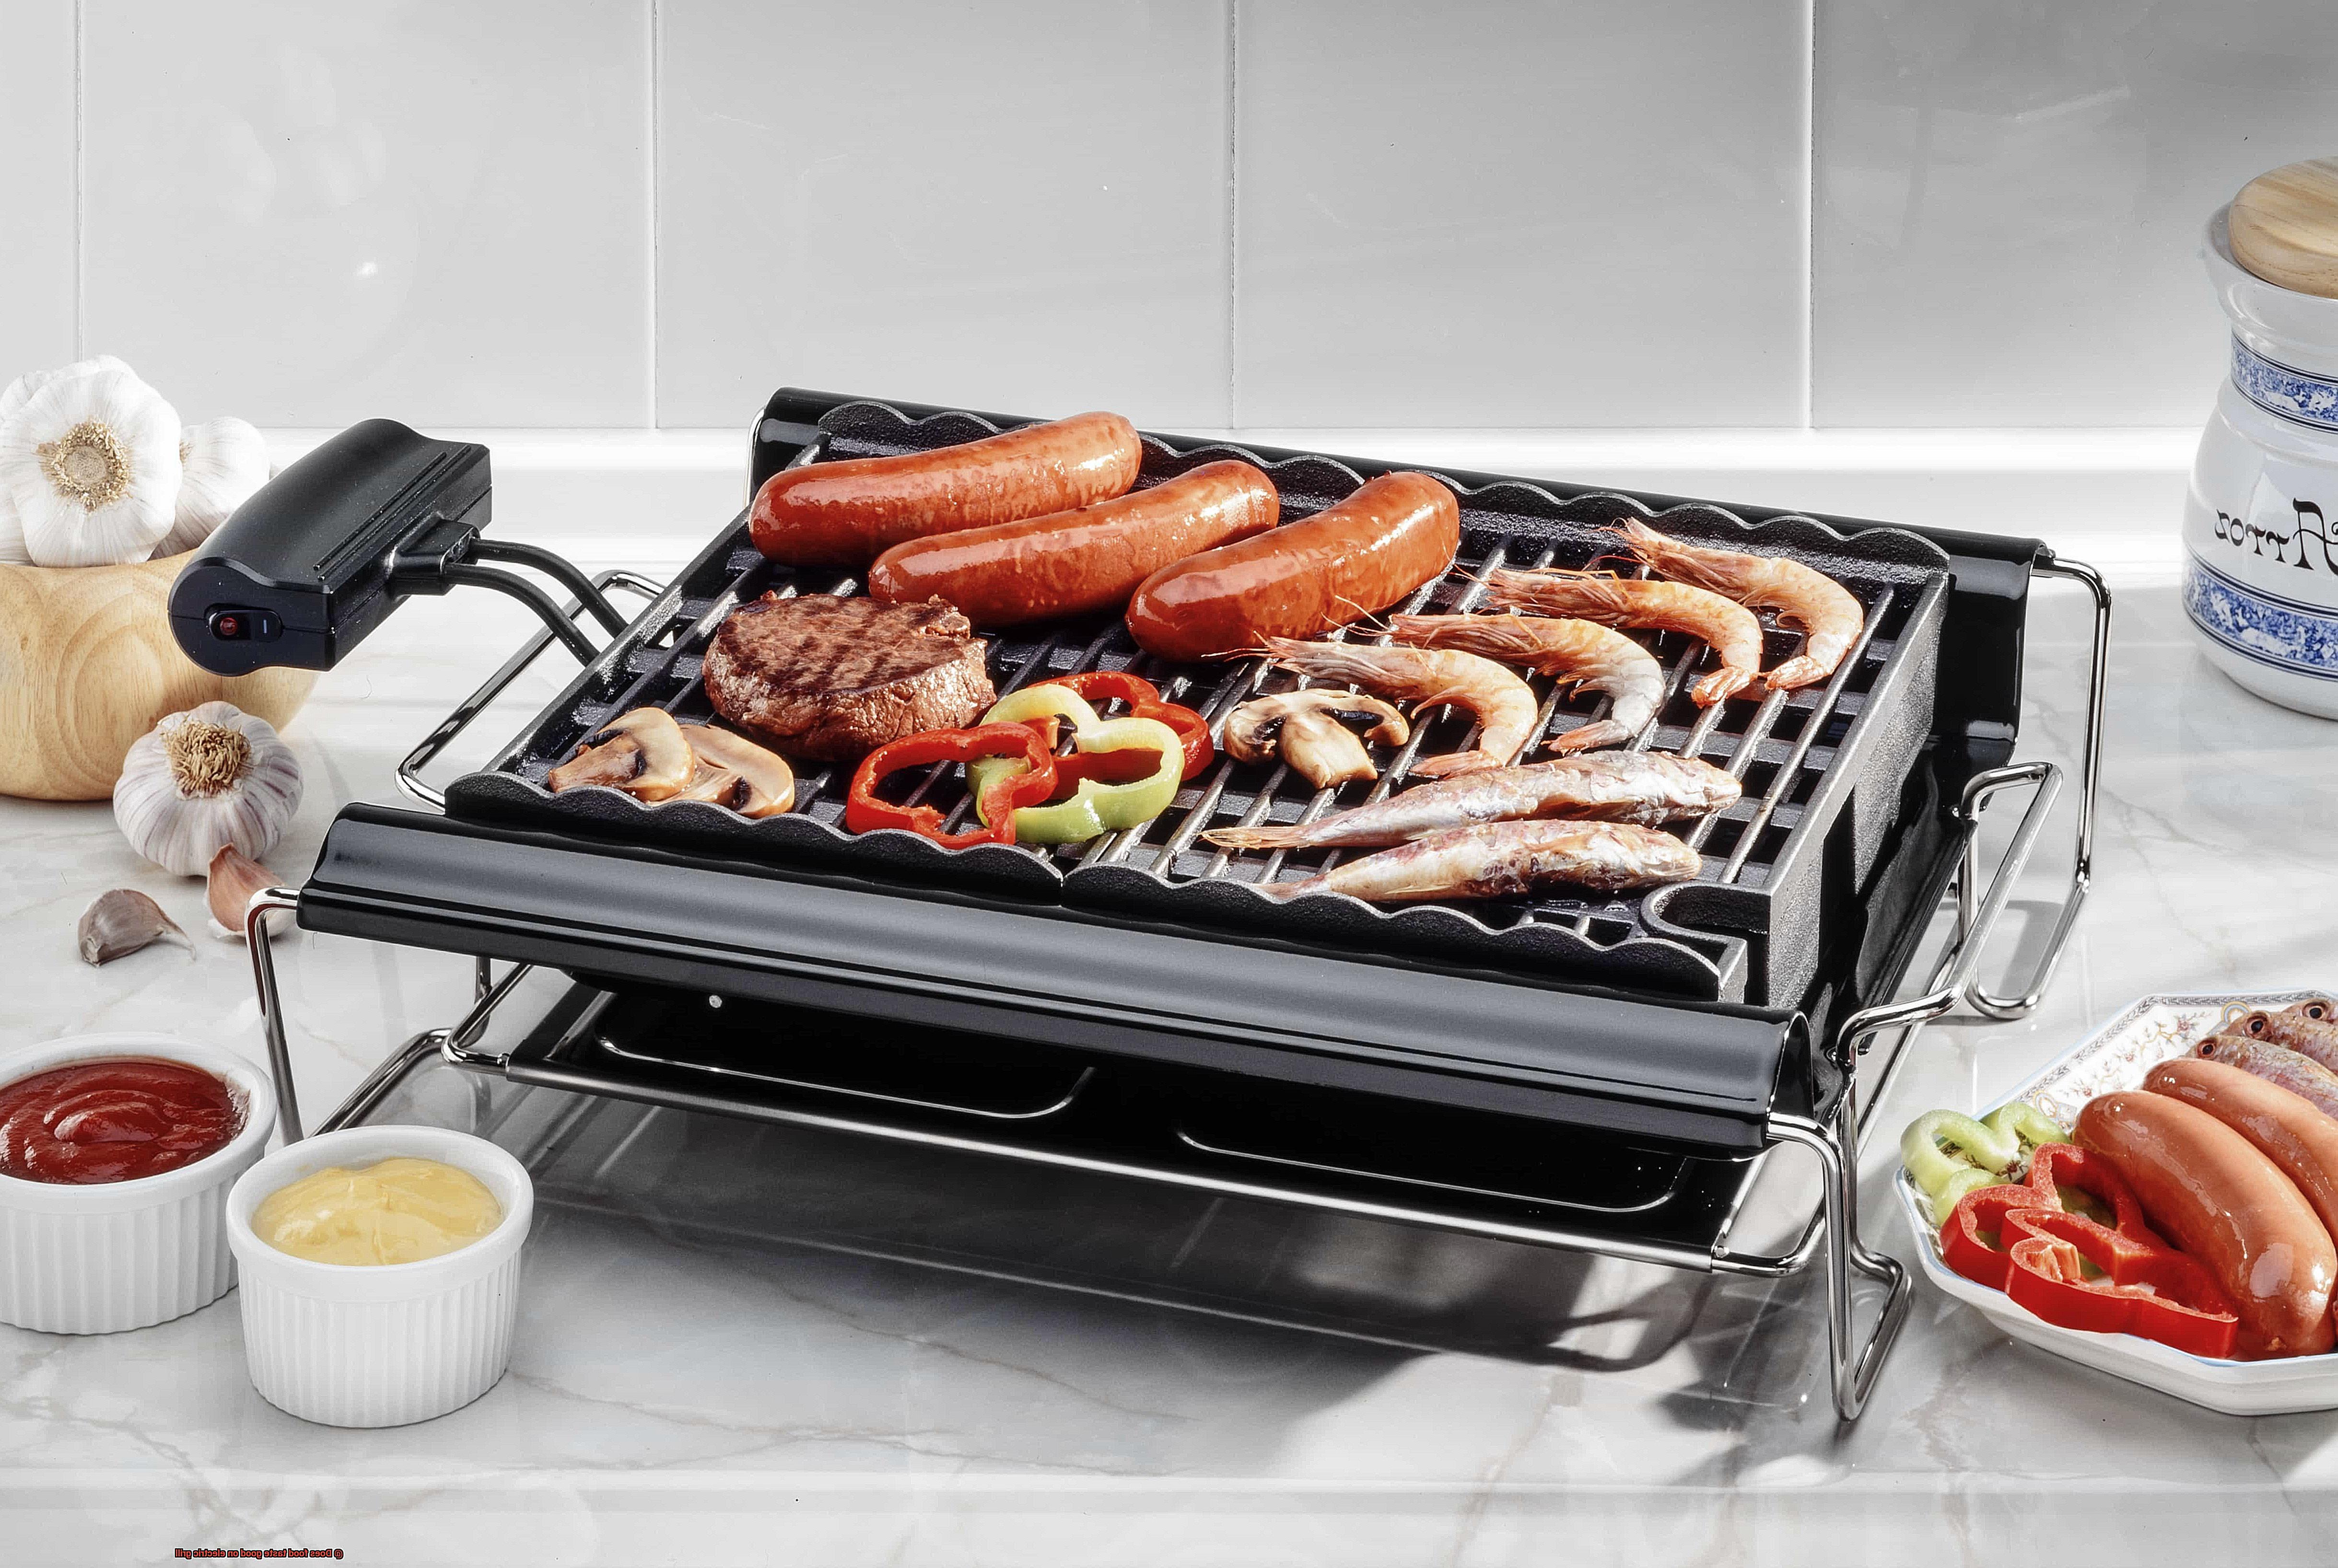 Does food taste good on electric grill-4